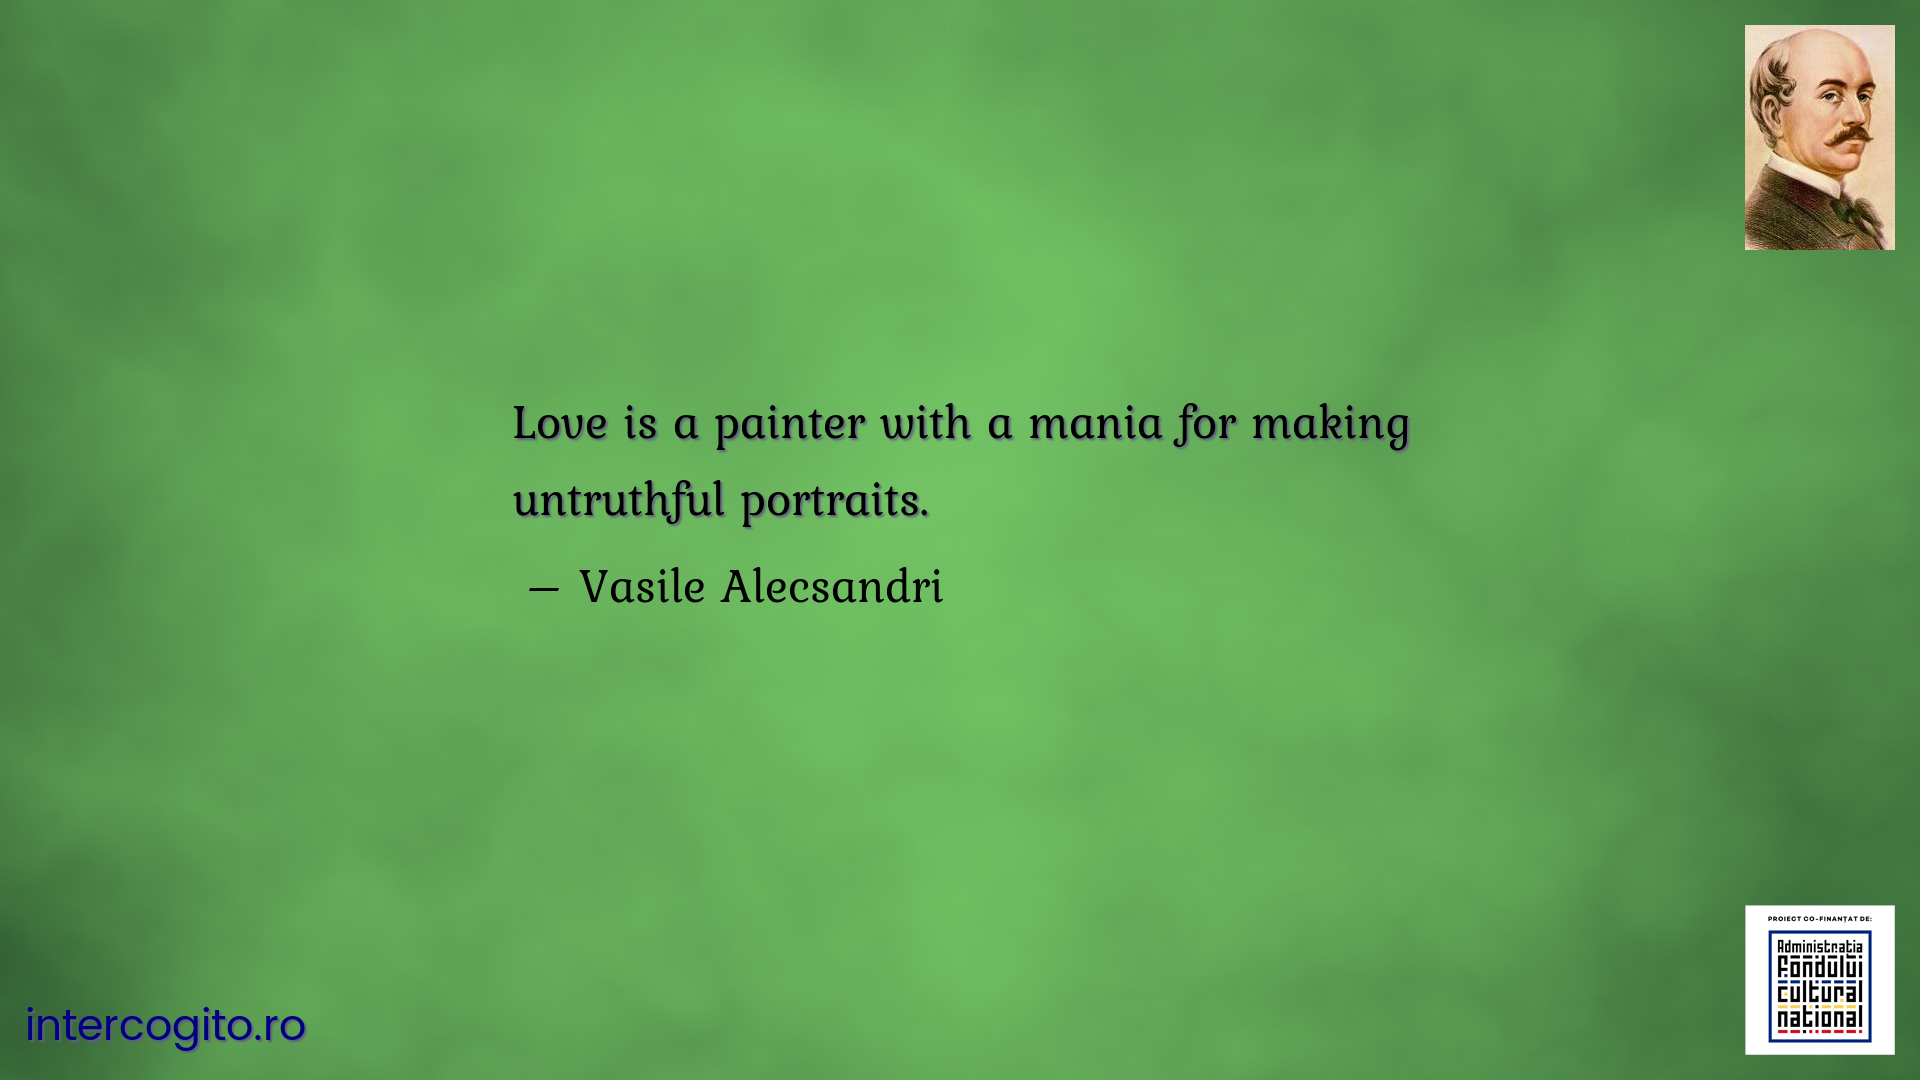 Love is a painter with a mania for making untruthful portraits.